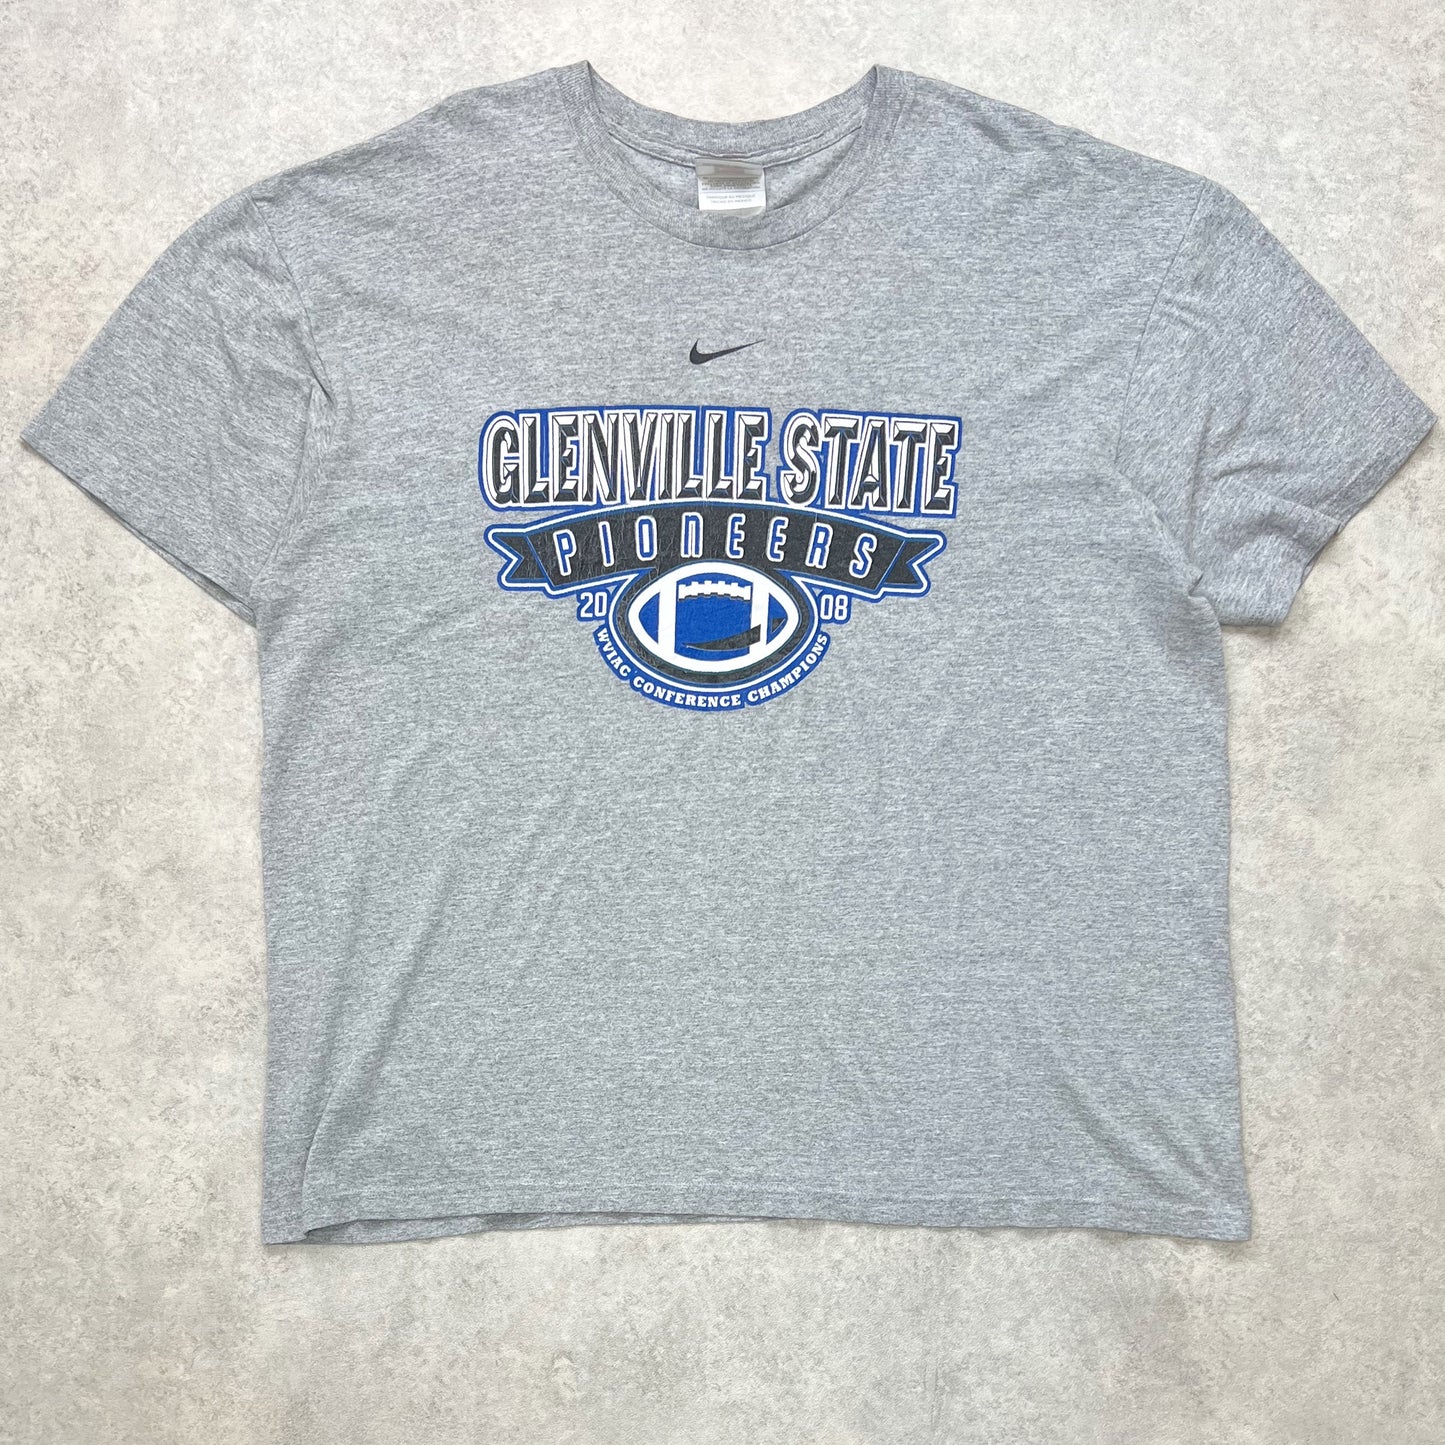 Nike Rare 90s Glenville State Tee (XL)